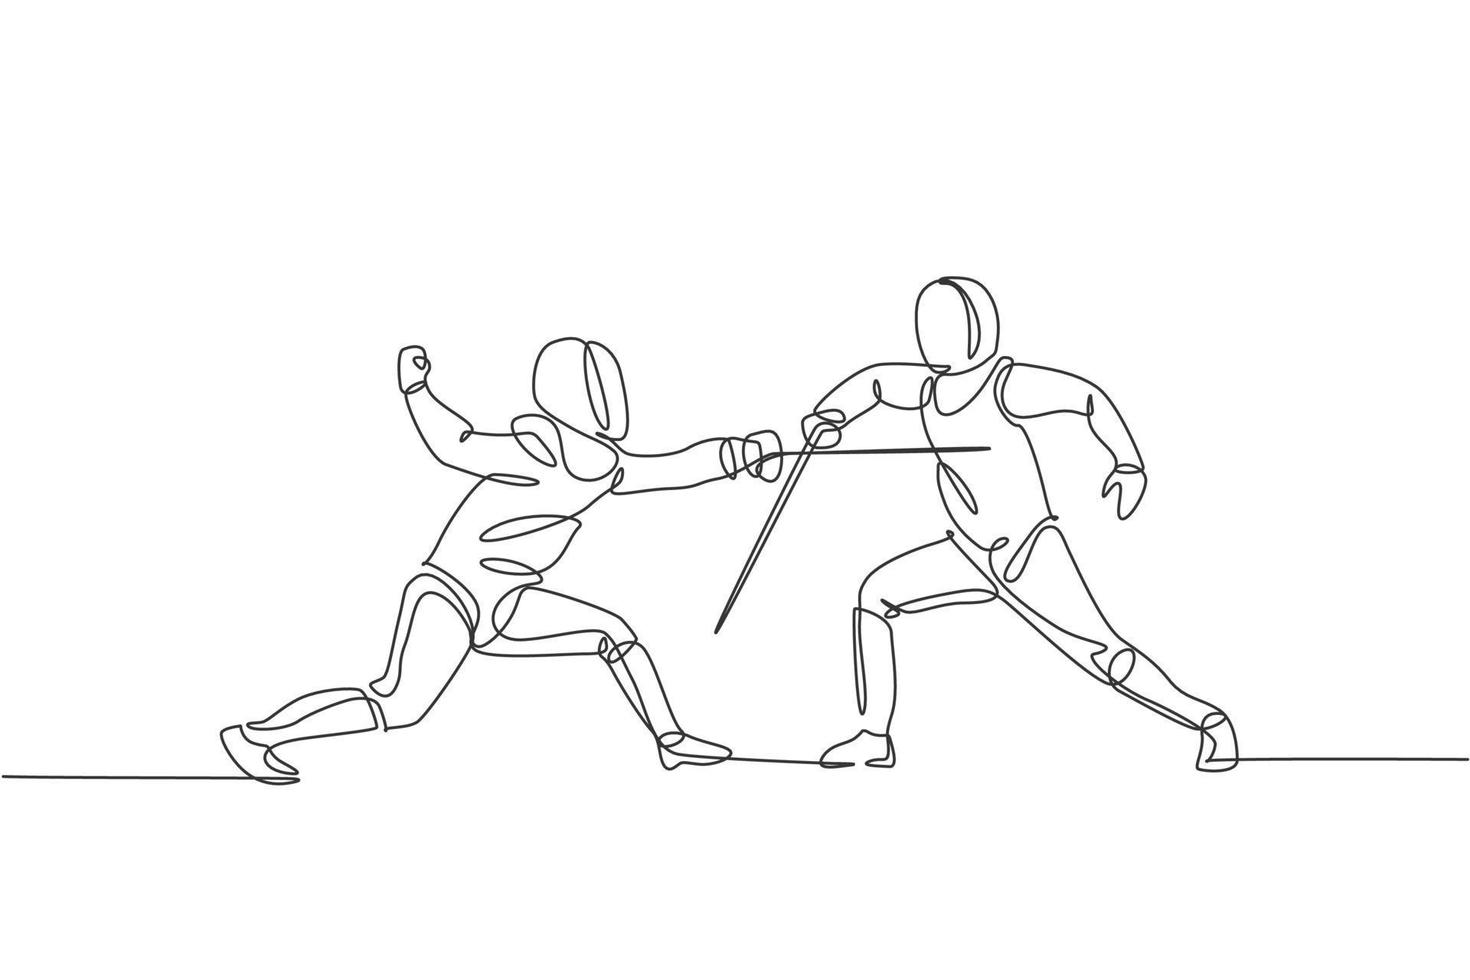 One single line drawing of two young men fencer athlete in fencing costume exercise motion on sport arena vector illustration. Combative and fighting sport concept. Modern continuous line draw design